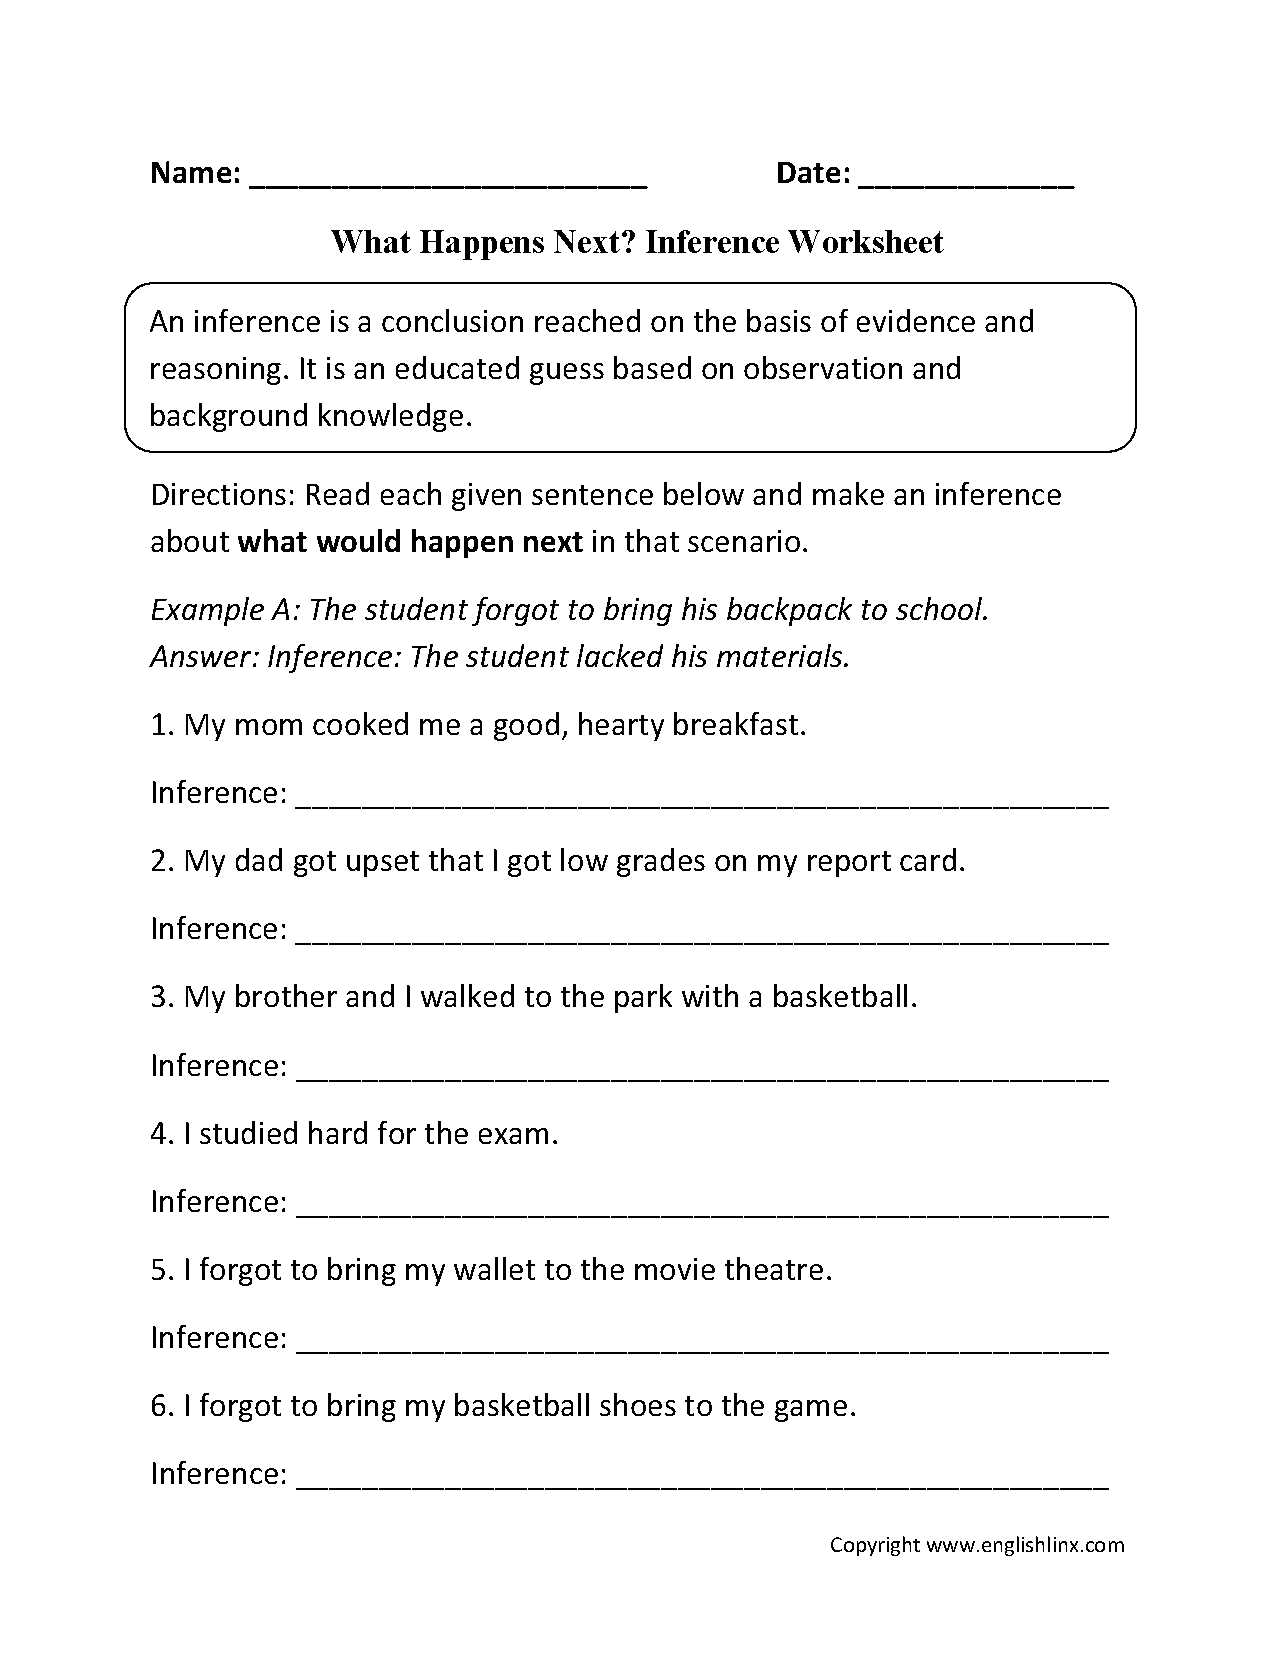 Inferences Worksheet 1 as Well as What Happens Next Inference Worksheets Reading